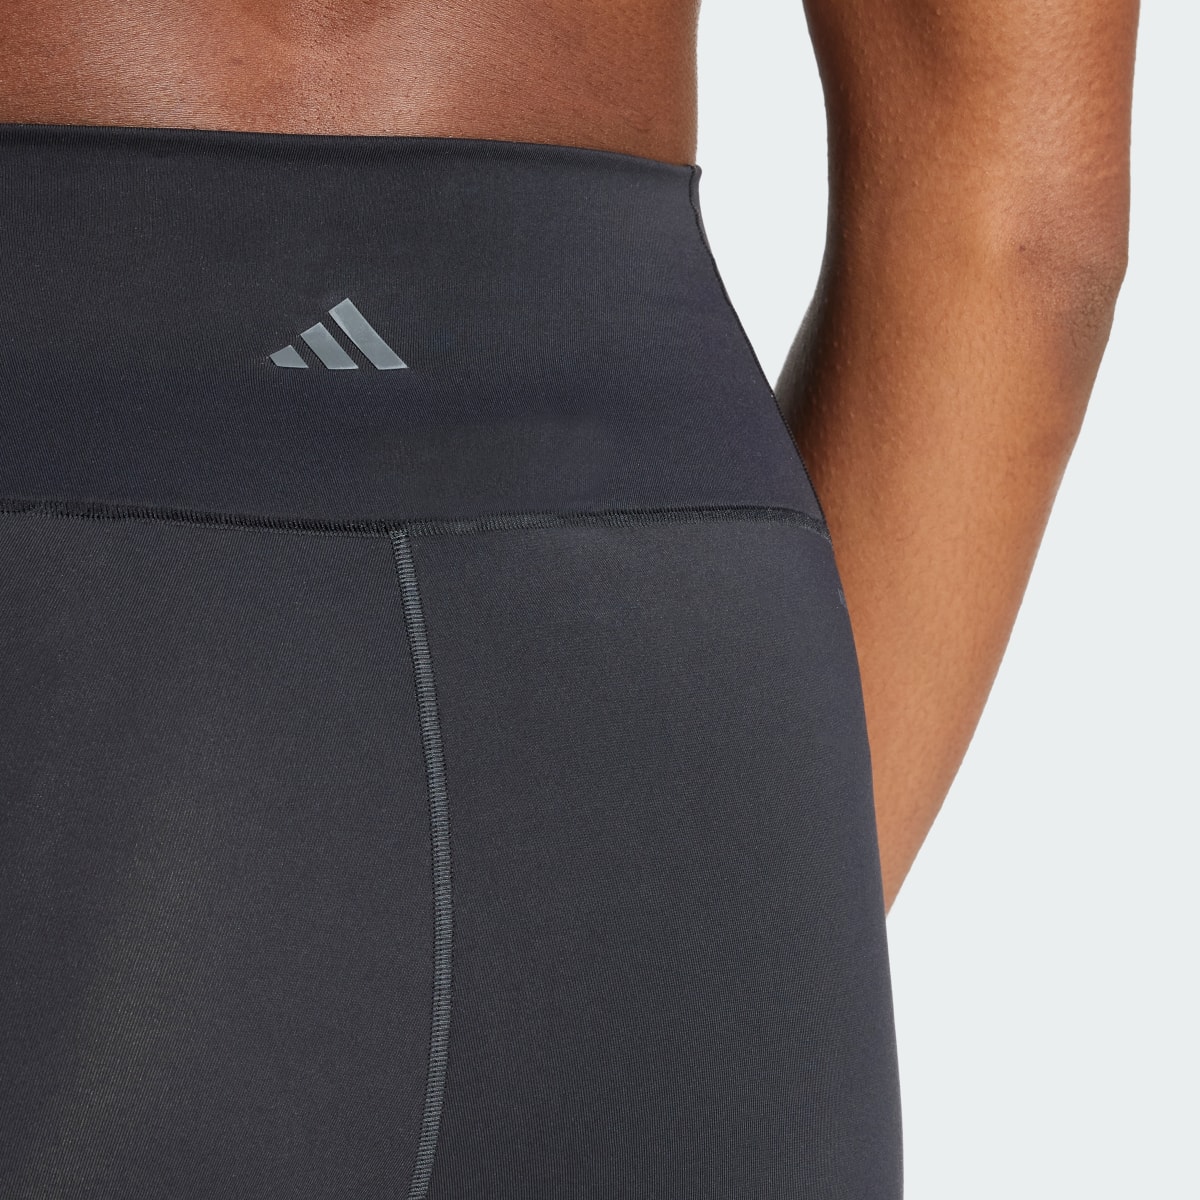 Adidas All Me Luxe 7/8 Leggings. 5